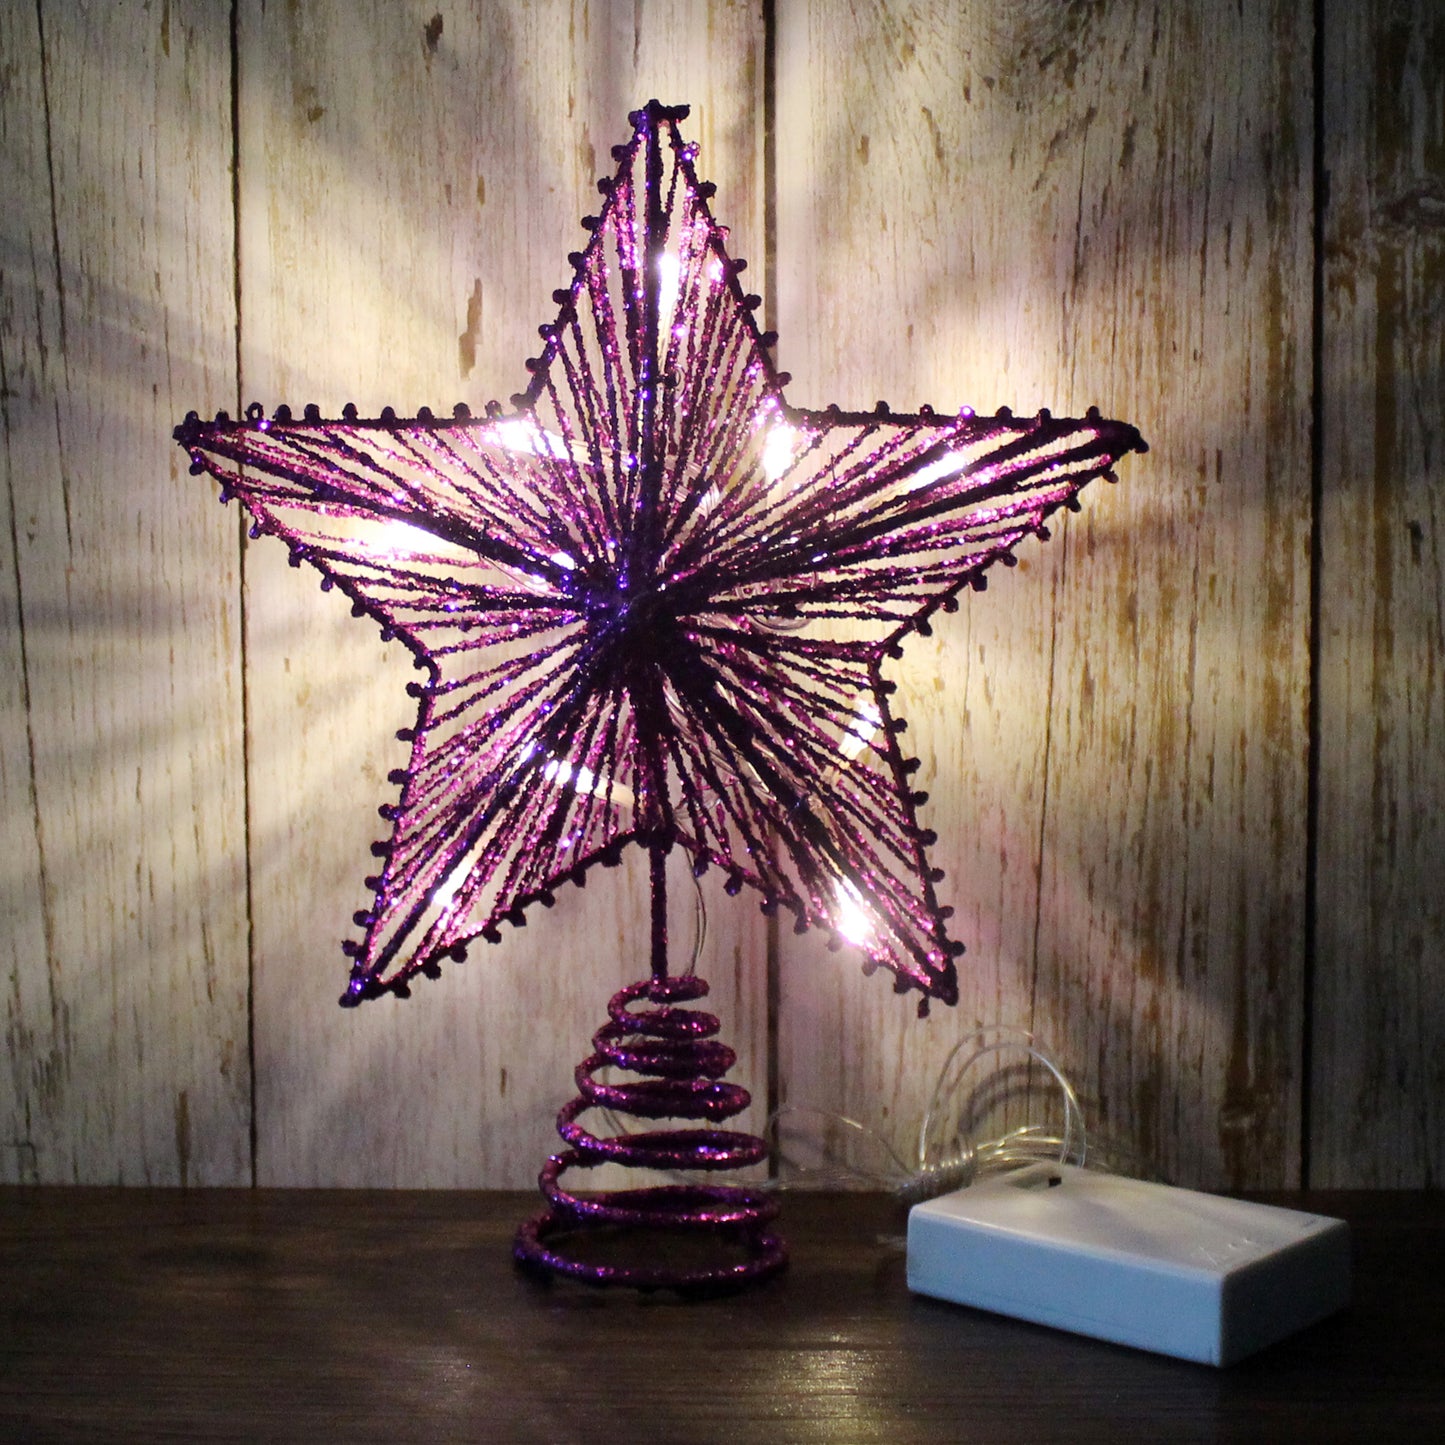 CVHOMEDECO. Violet Glittered 3D Tree Top Star with Warm White LED Lights and timer for Christmas Tree Decoration and Holiday Seasonal Décor, 8 x 10 Inch